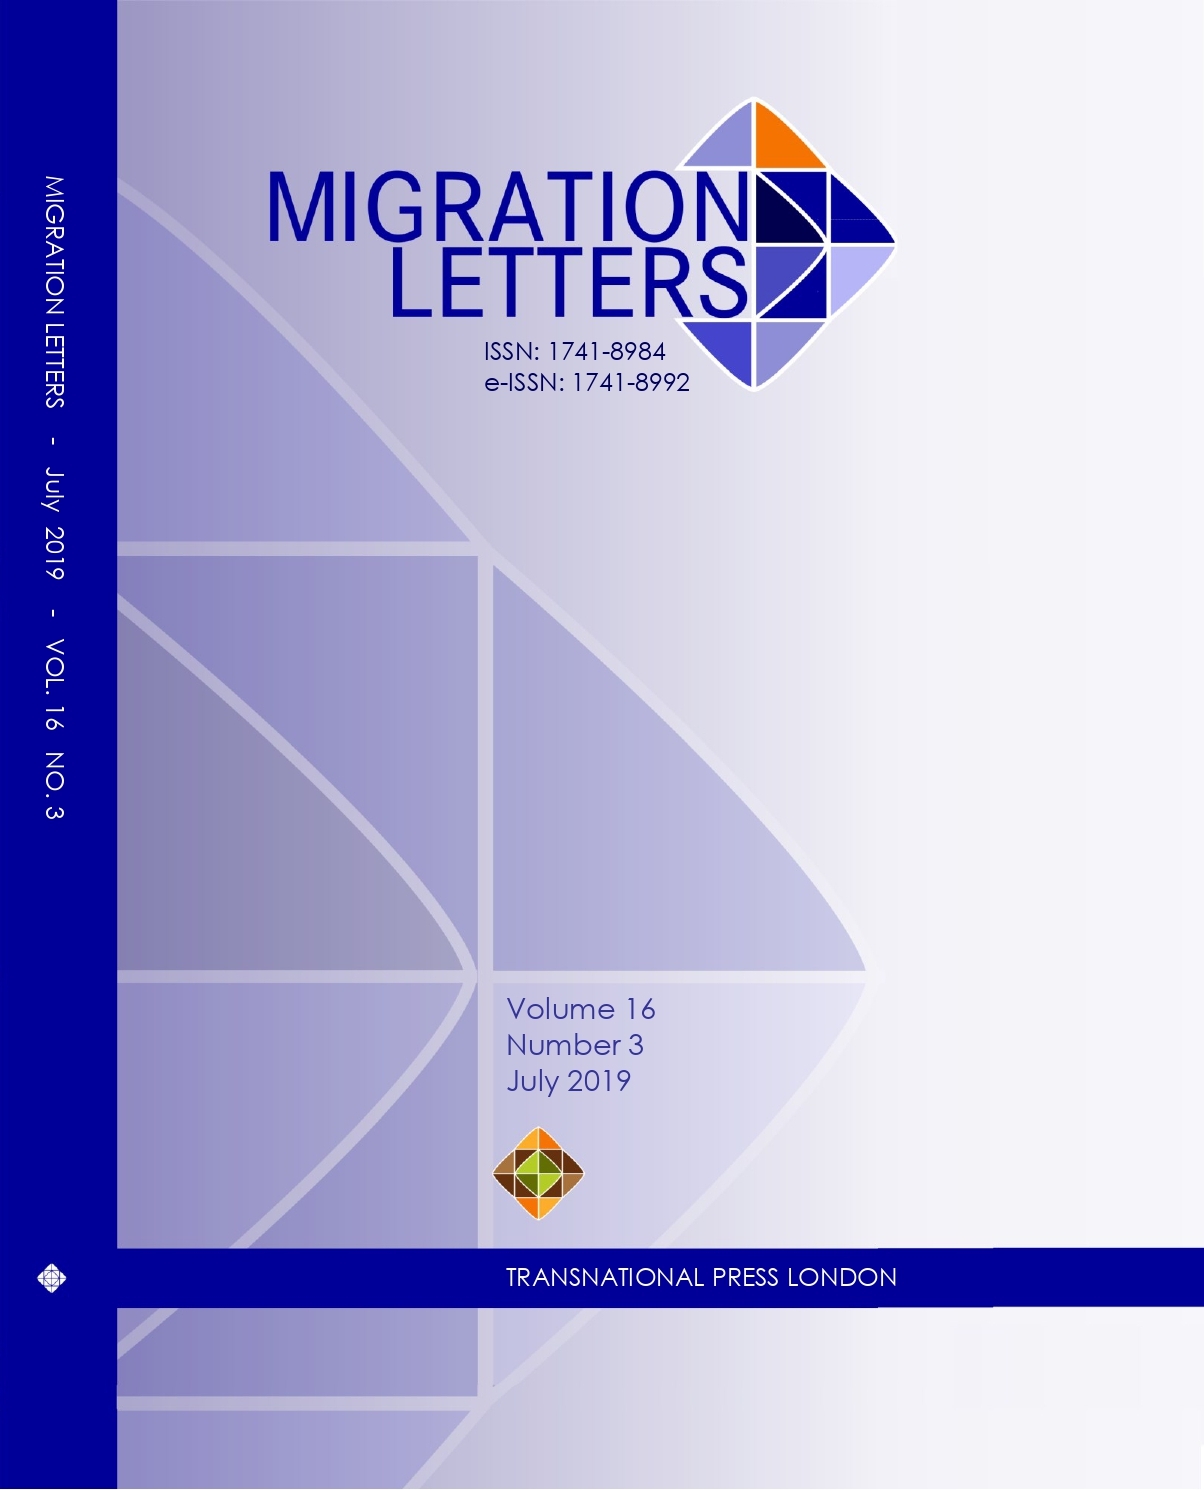 Treading lightly: regularised migrant workers in Europe Cover Image